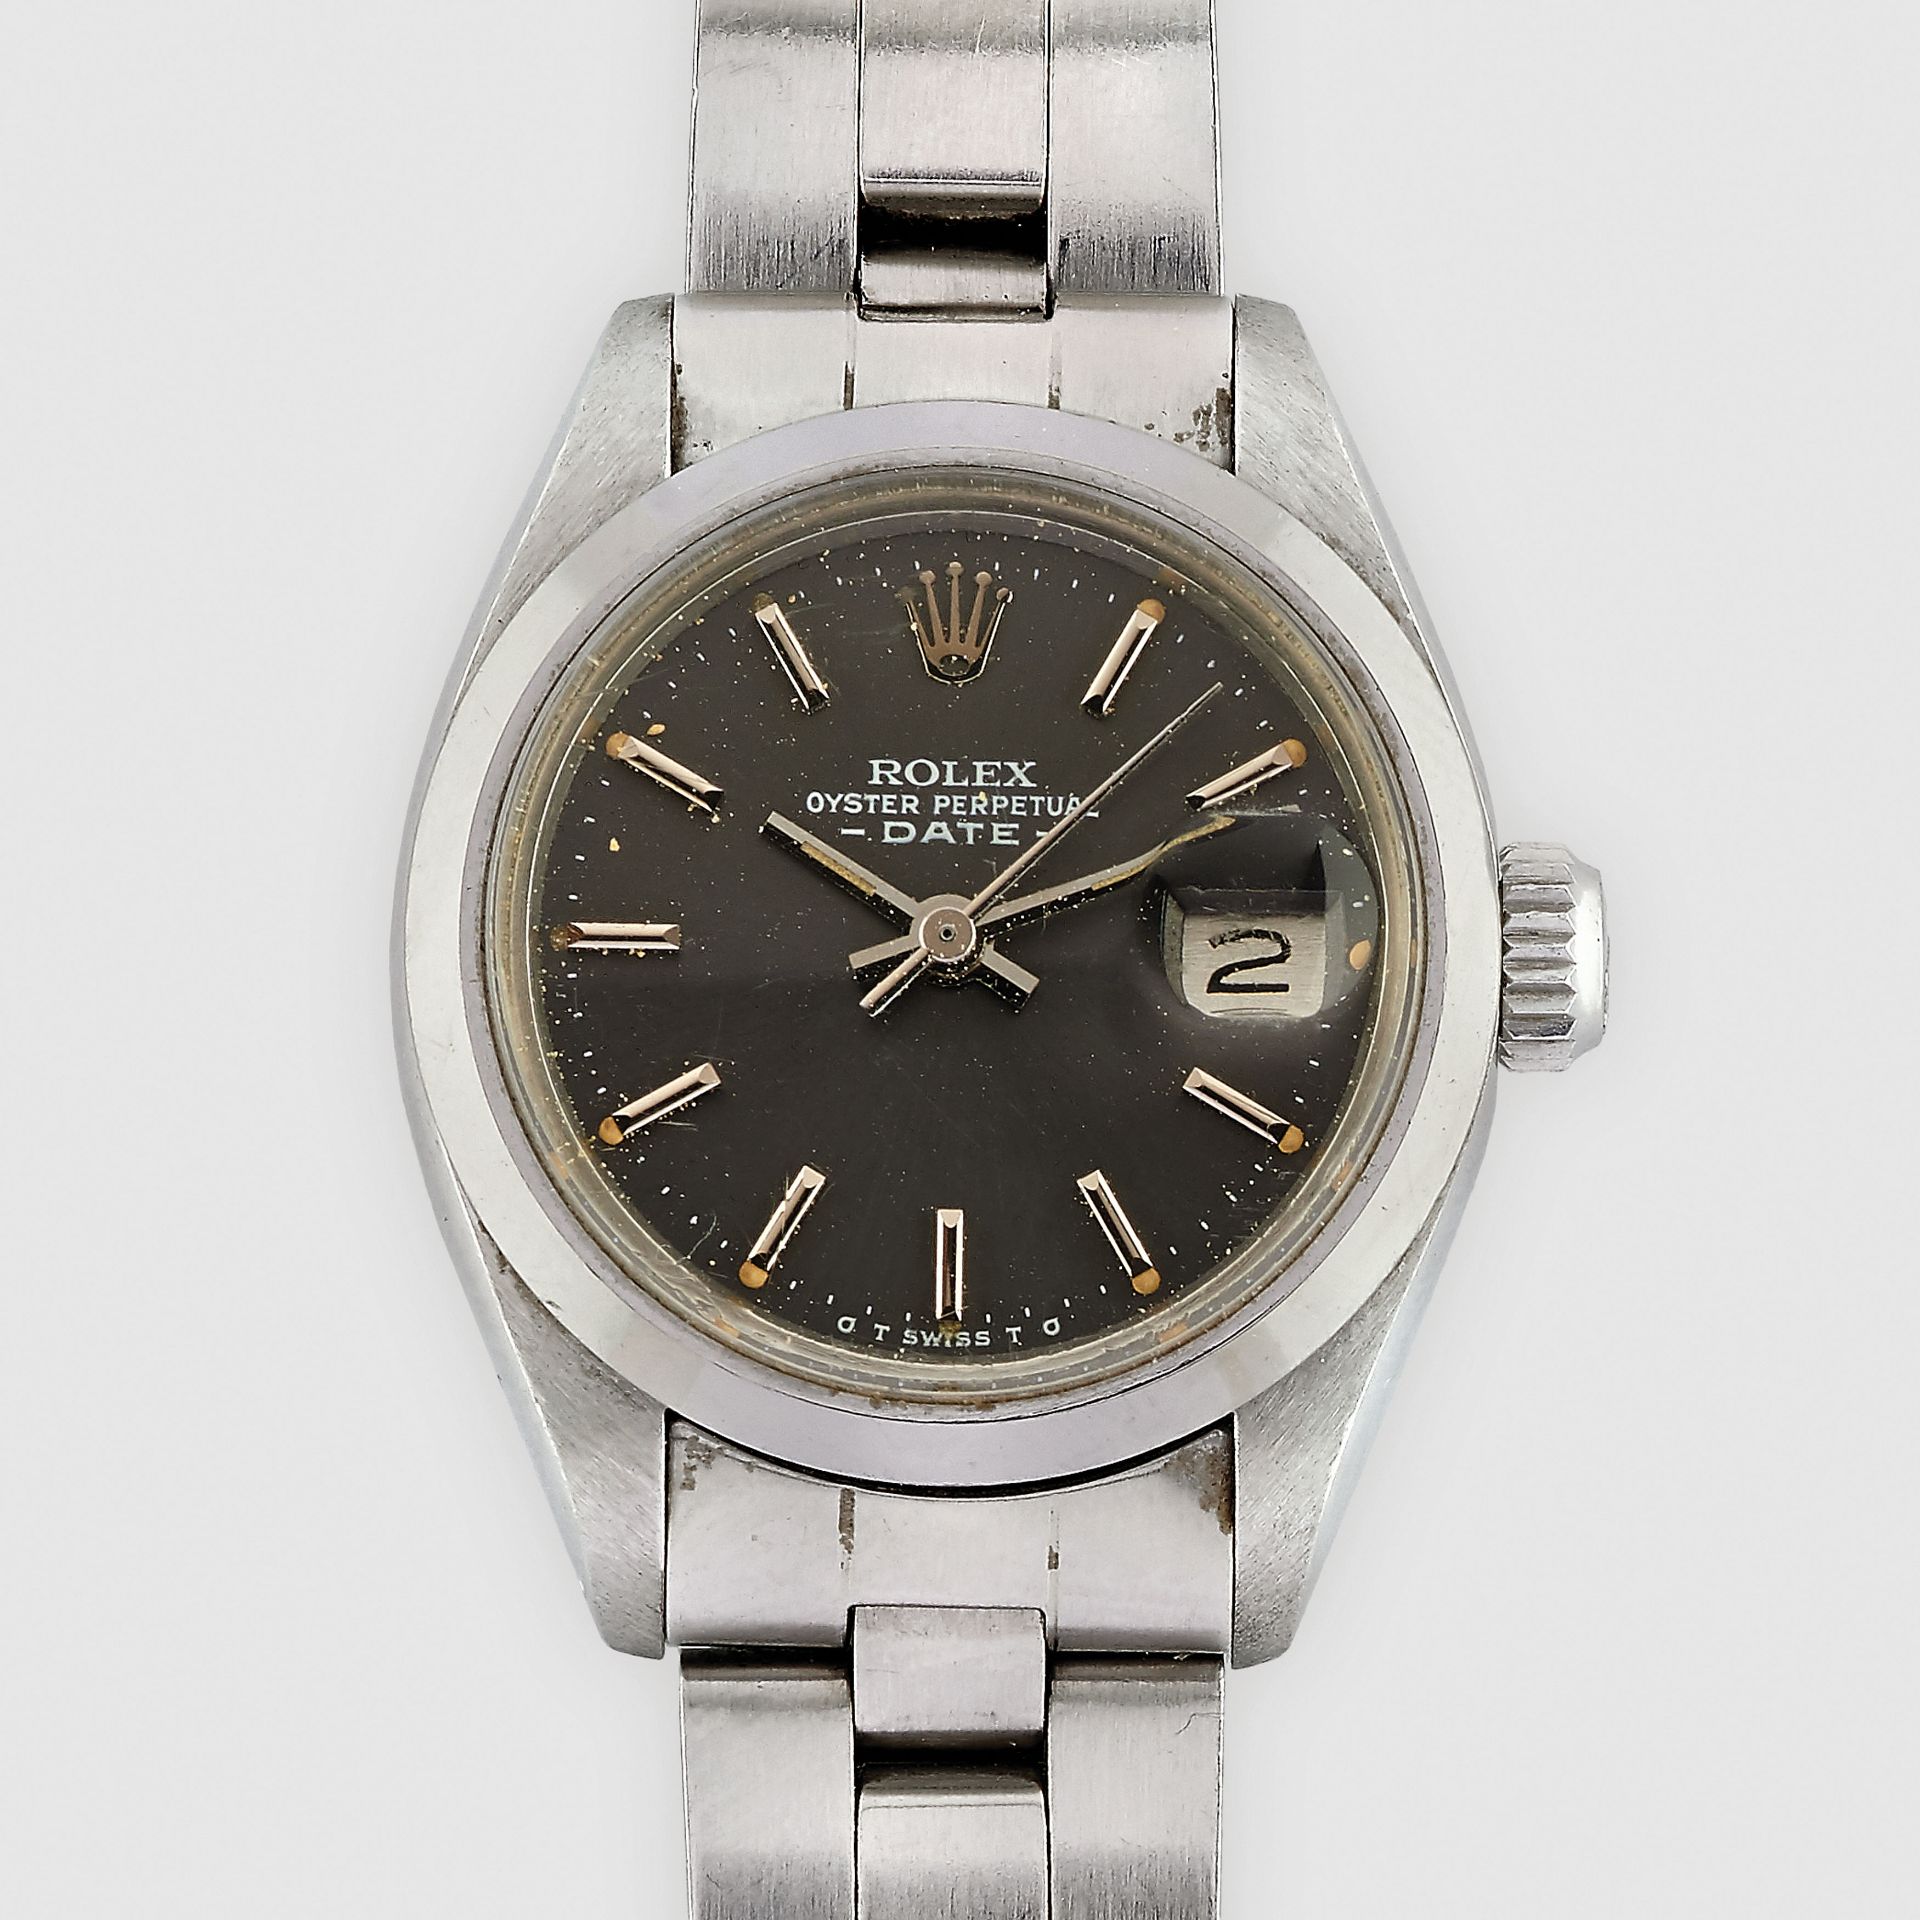 MONTRE-BRACELET ROLEX OYSTER PERPETUAL DATE RÈF 6917 - Image 2 of 6